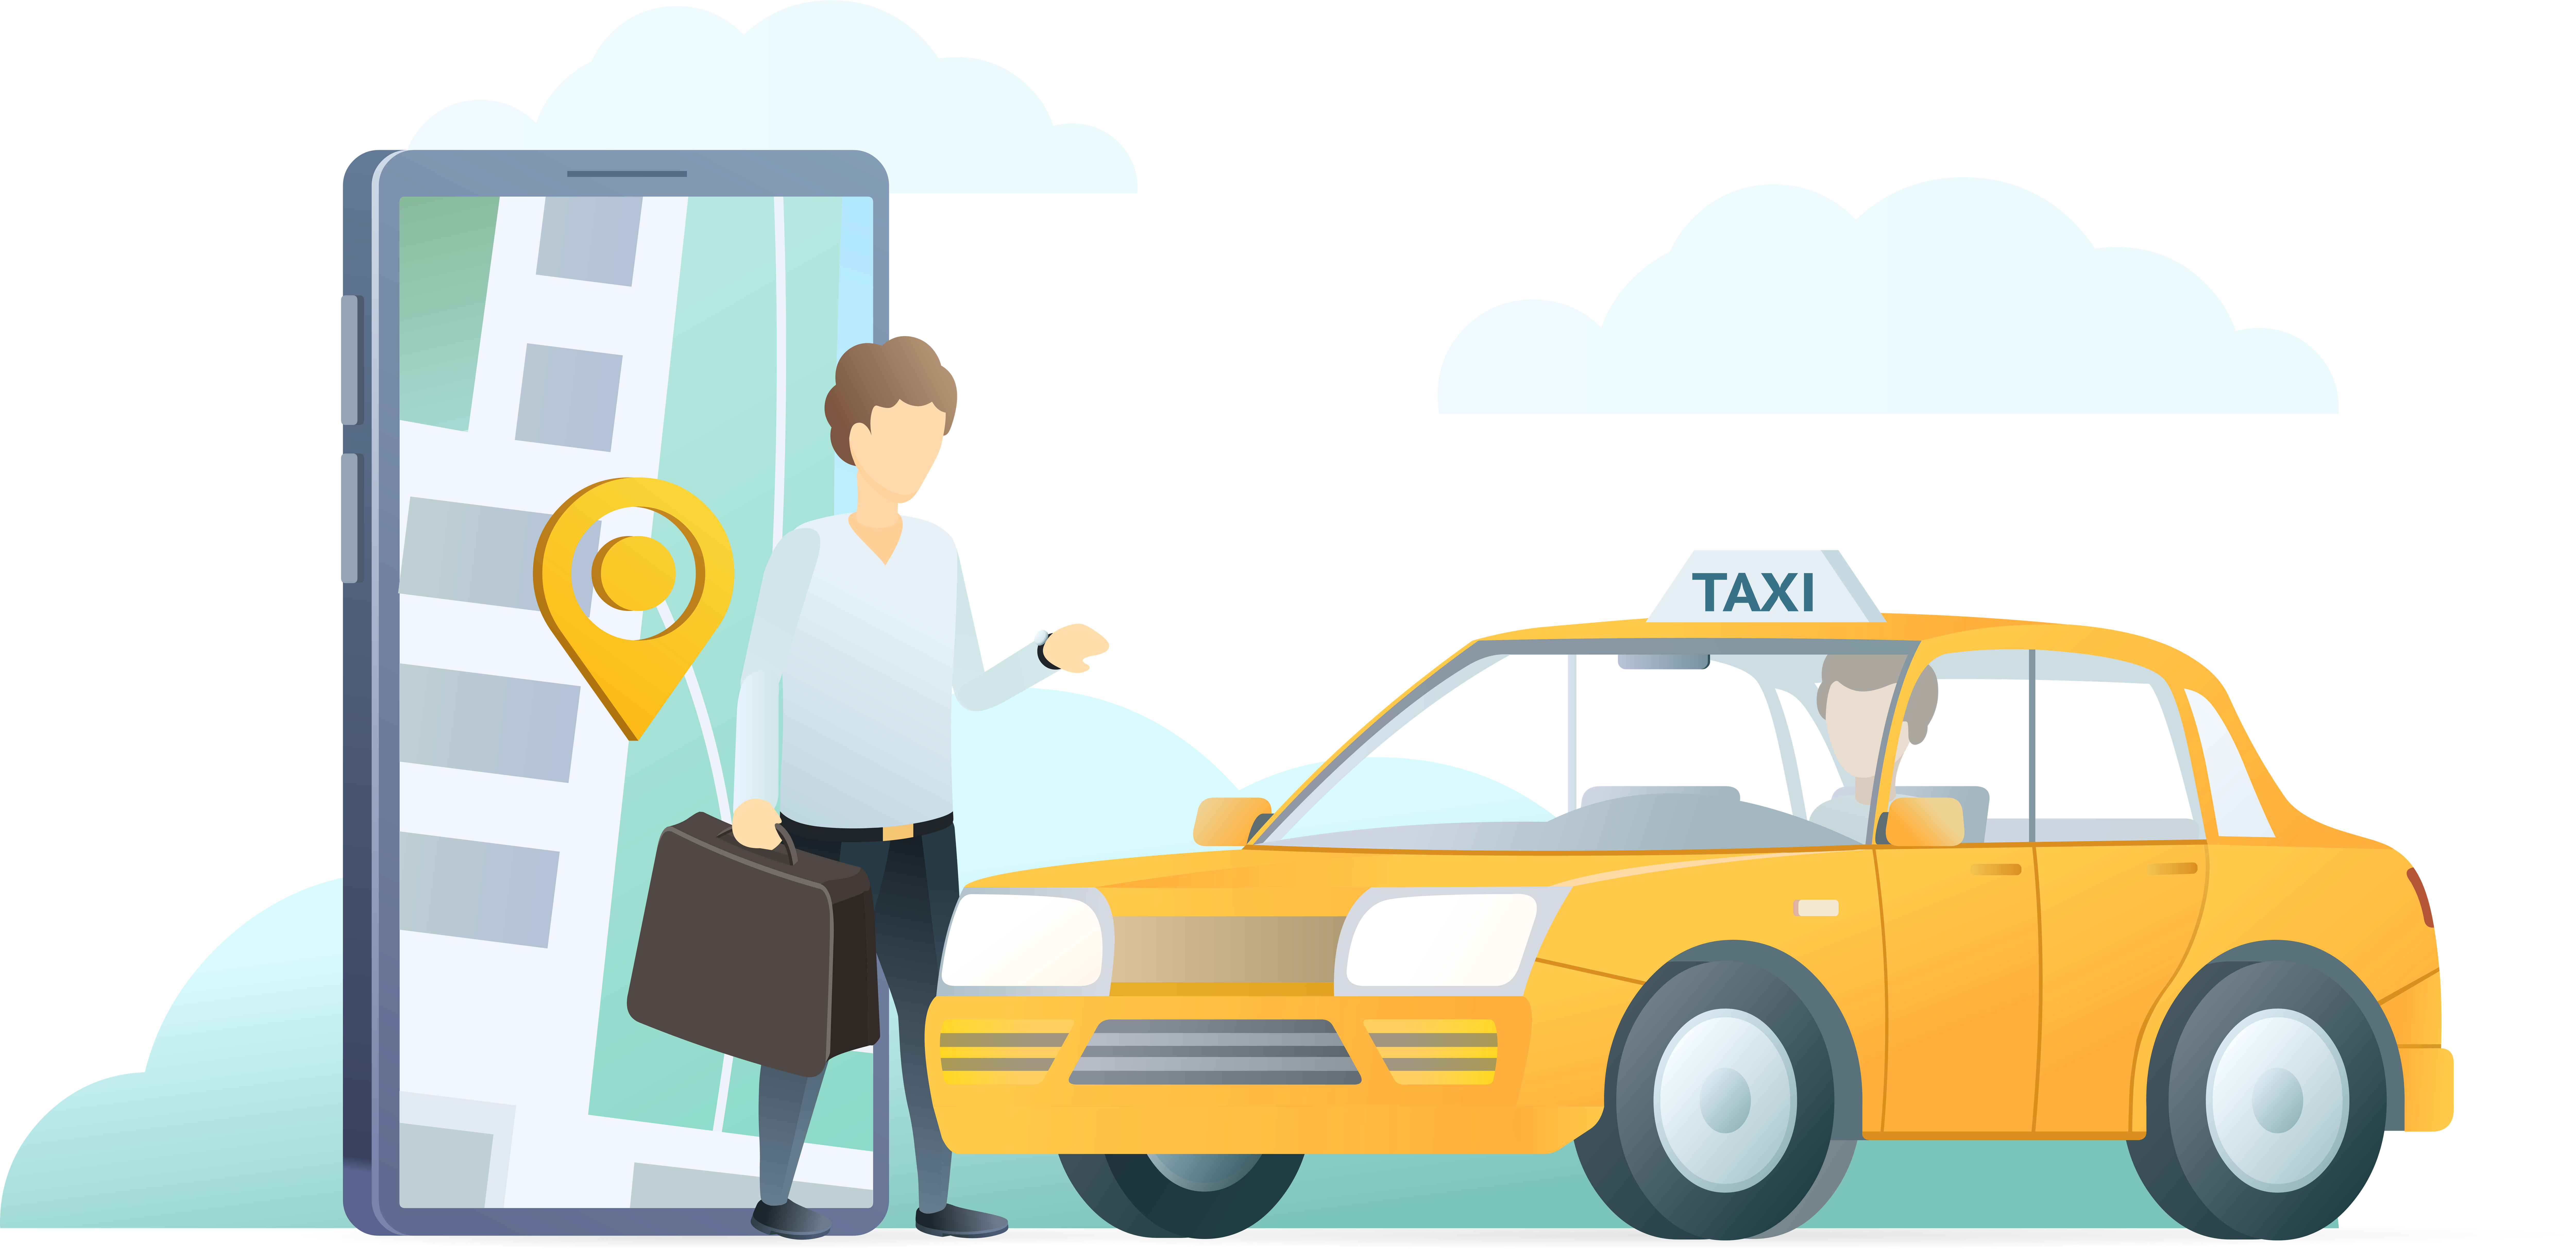 Illustration of a person catching a taxi